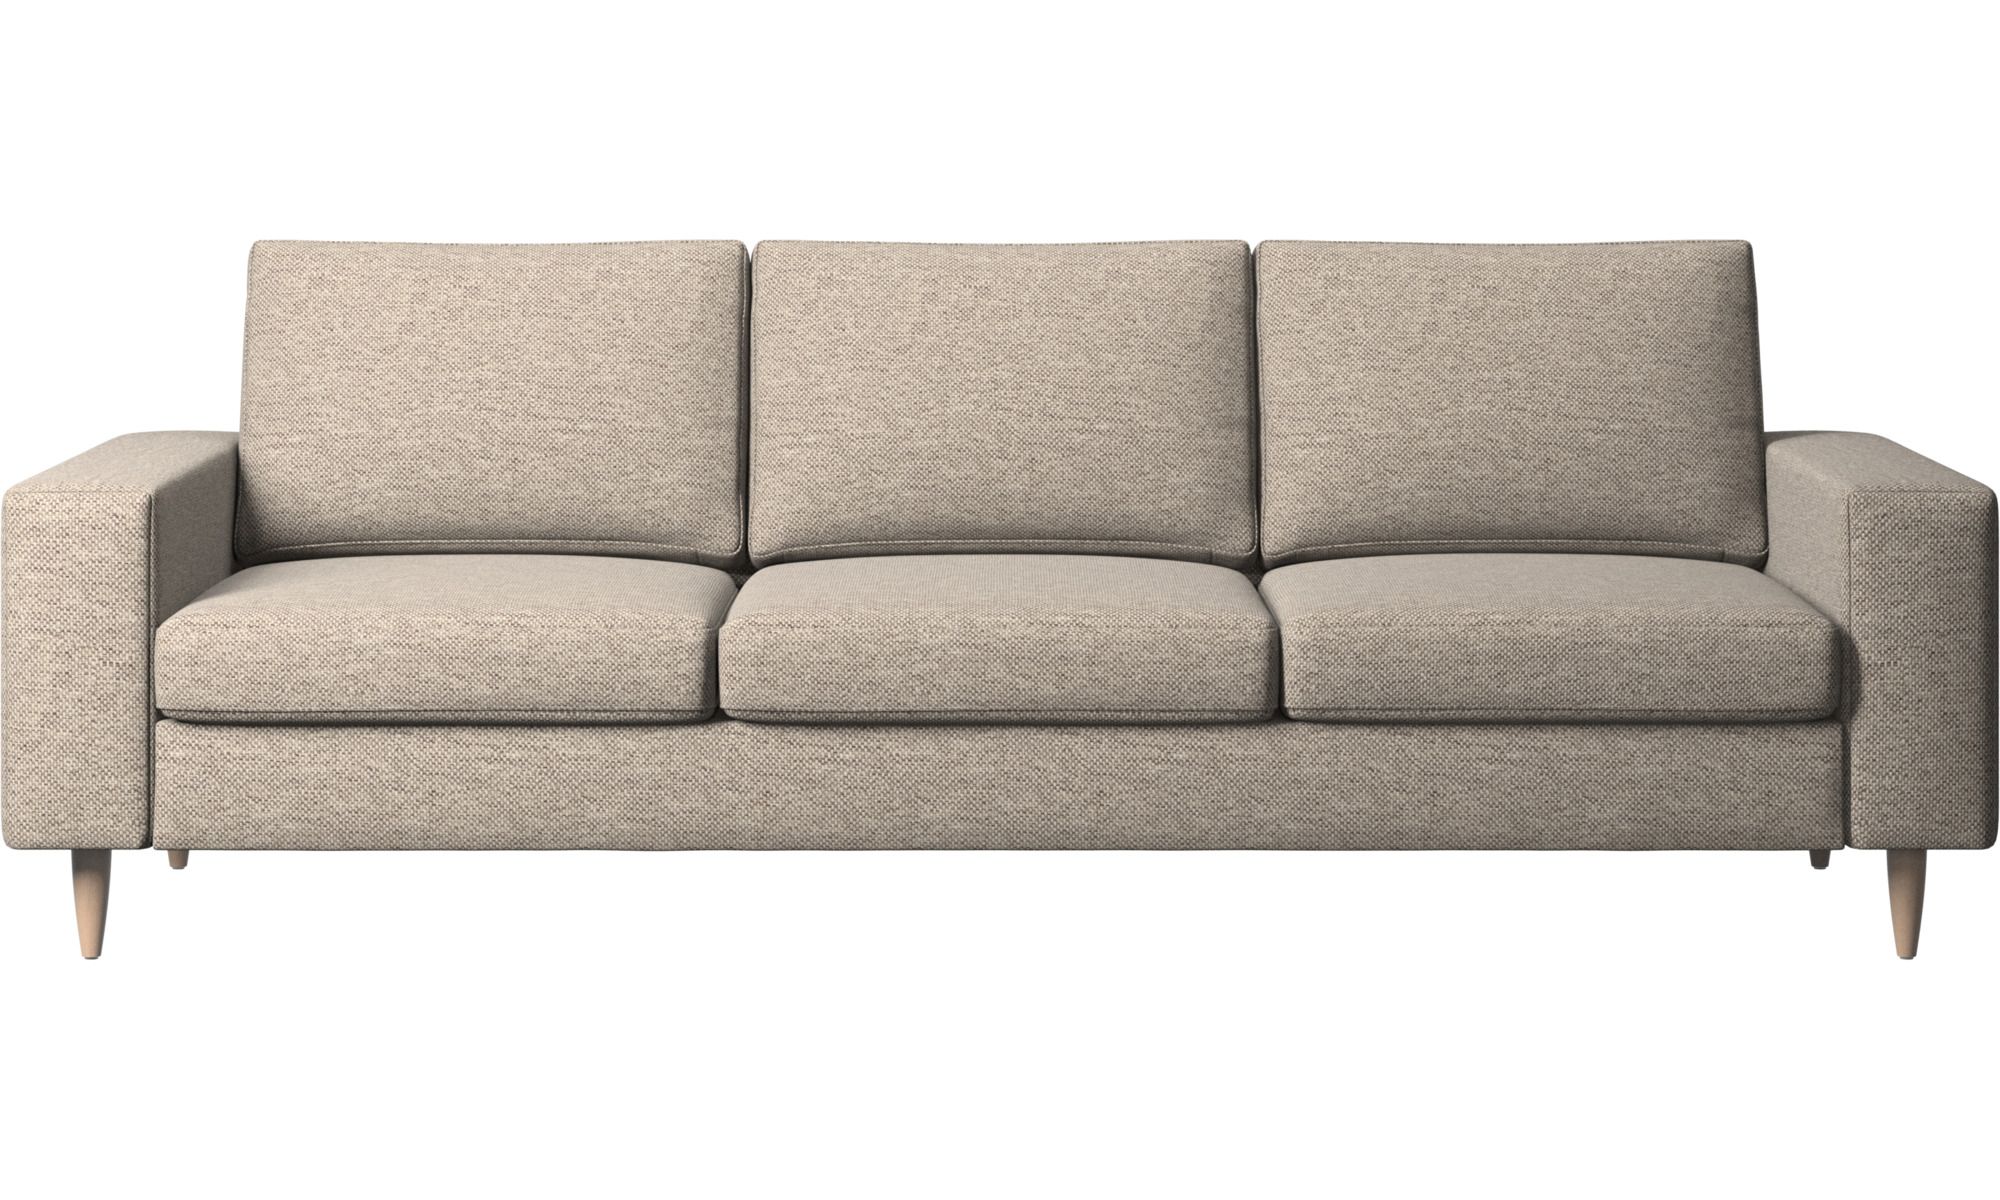 Indivi Sofa – Visit Us For Styling Advice – Boconcept Throughout Sofas In Beige (View 13 of 15)